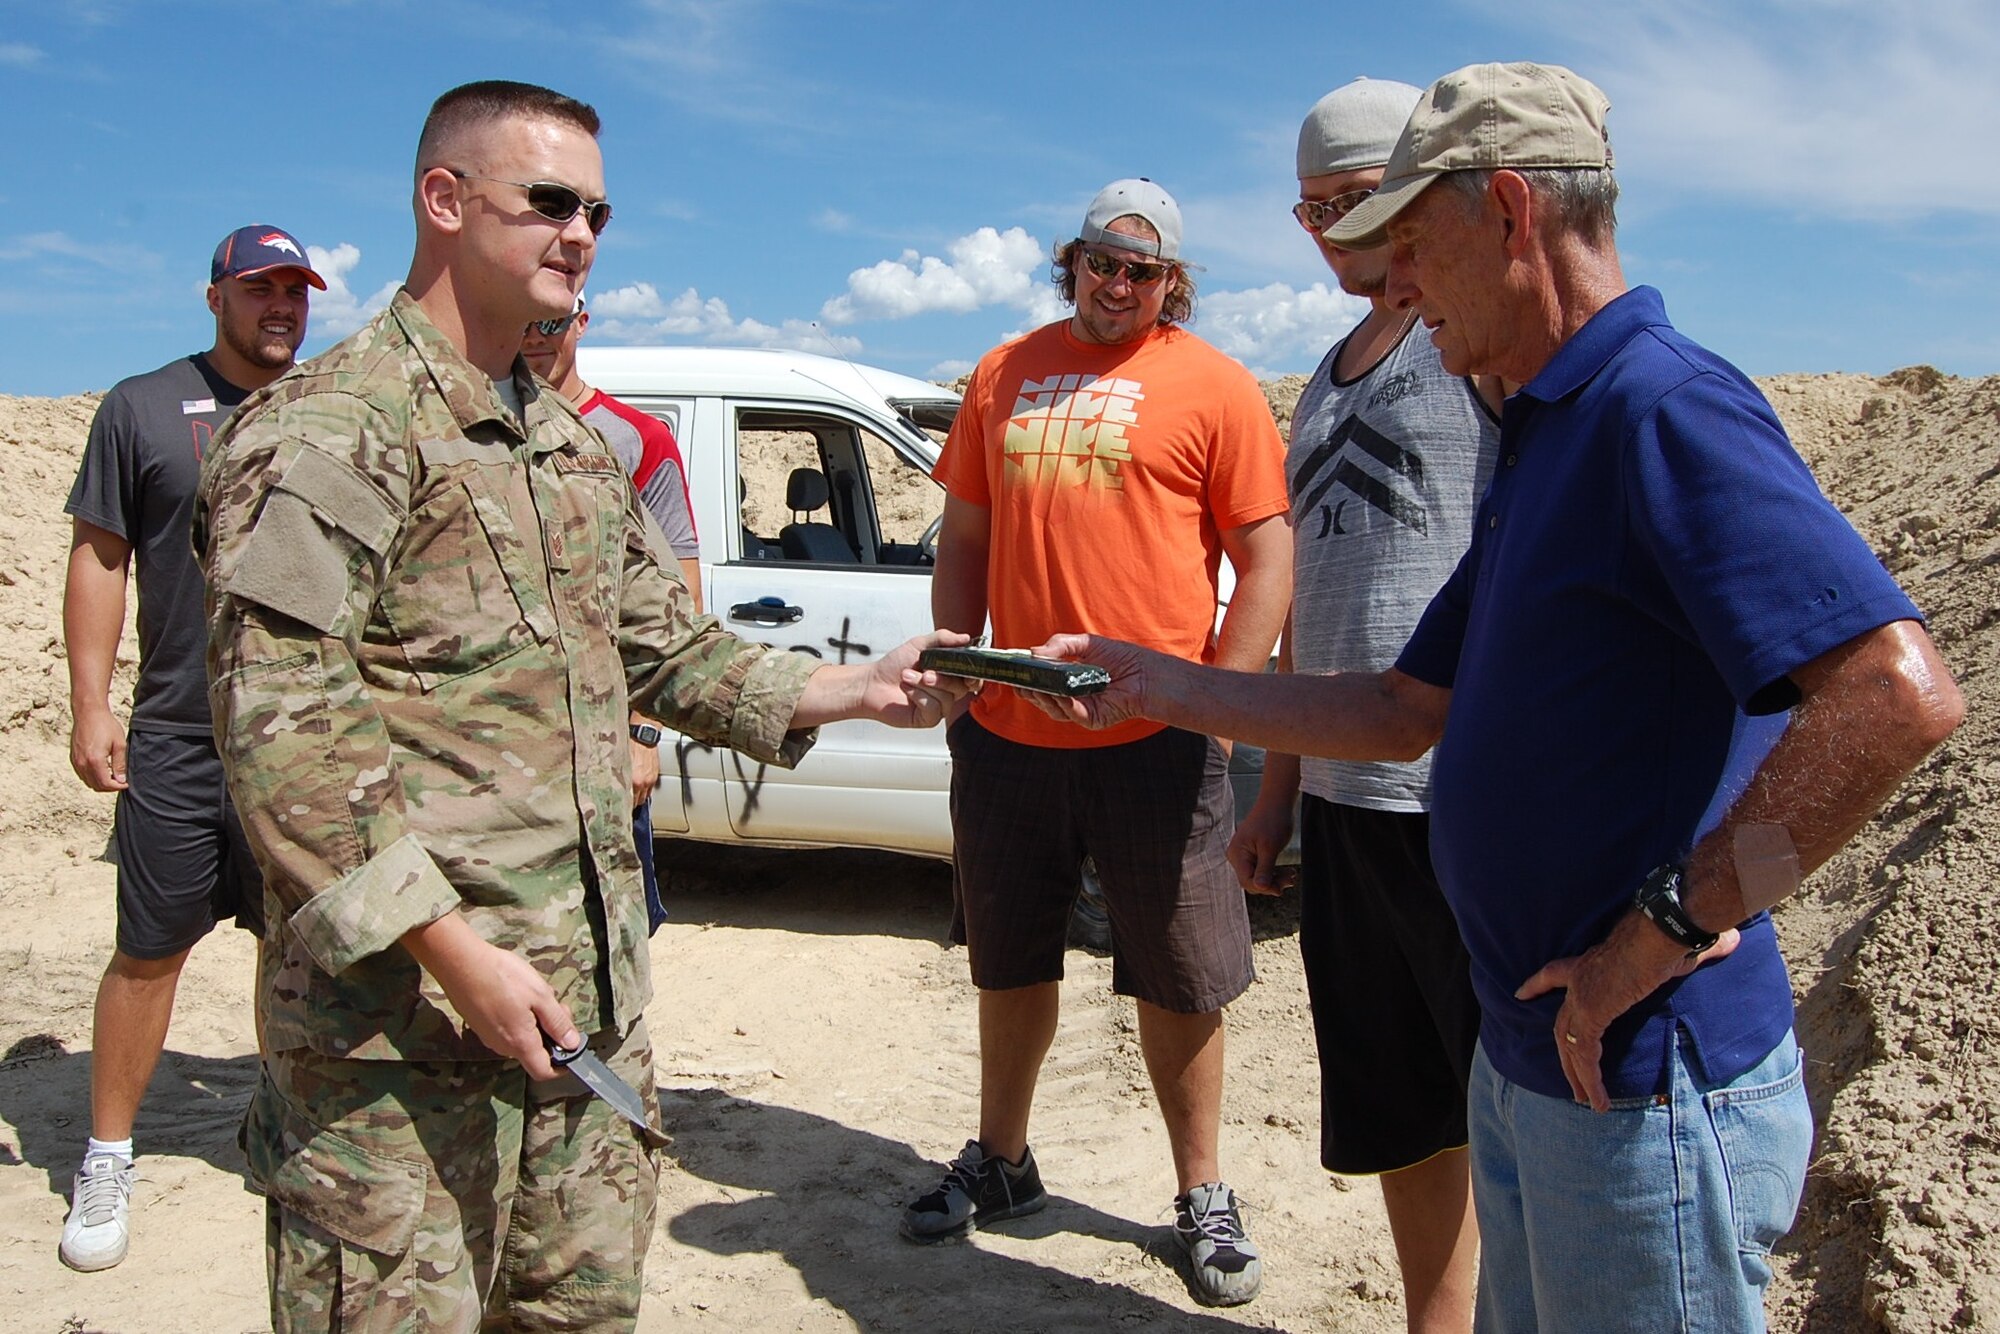 Colorado Air National Guard Tech. Sgt. Andrew LeBeau, 140th Explosive Ordnance Disposal Flight, shows Col. (ret) Hugh Garland a block of C4, a highly explosive material, during the EOD Demo Day July 12, 2013 at Airburst Range, Fort Carson, Colo. (U.S. Air National Guard photo by Capt. Kinder Blacke)